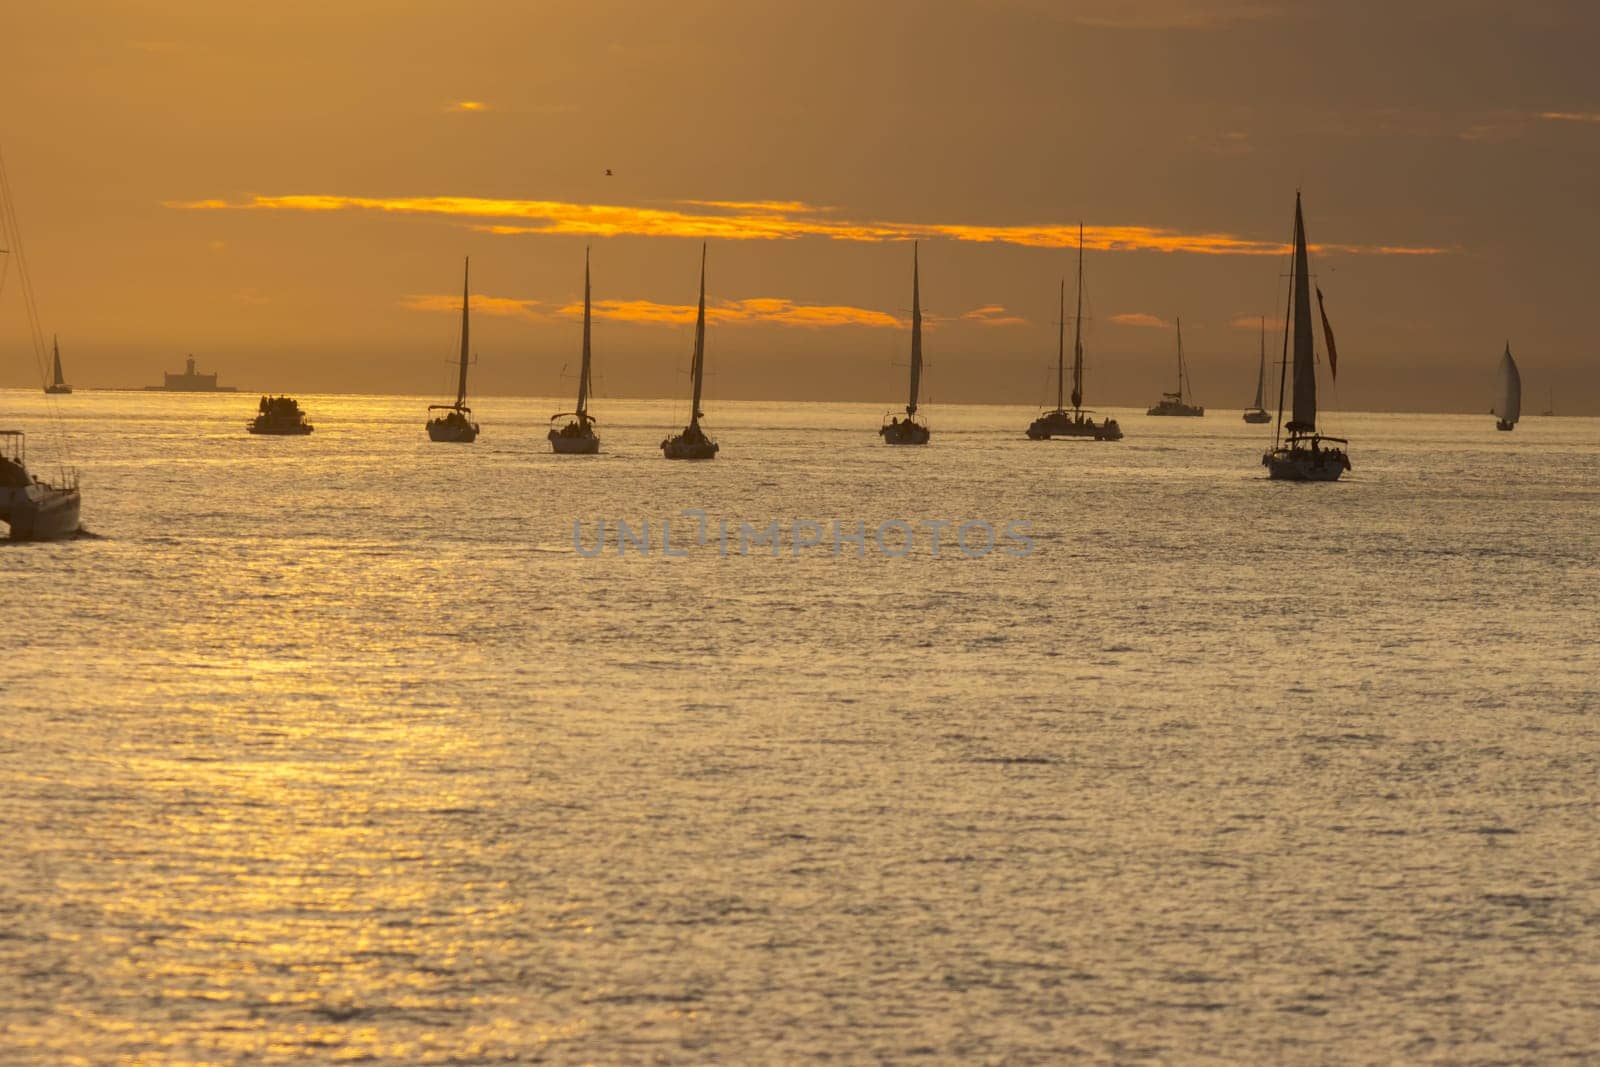 Sailing boats are sailing in the sea at orange sunset. Mid shot